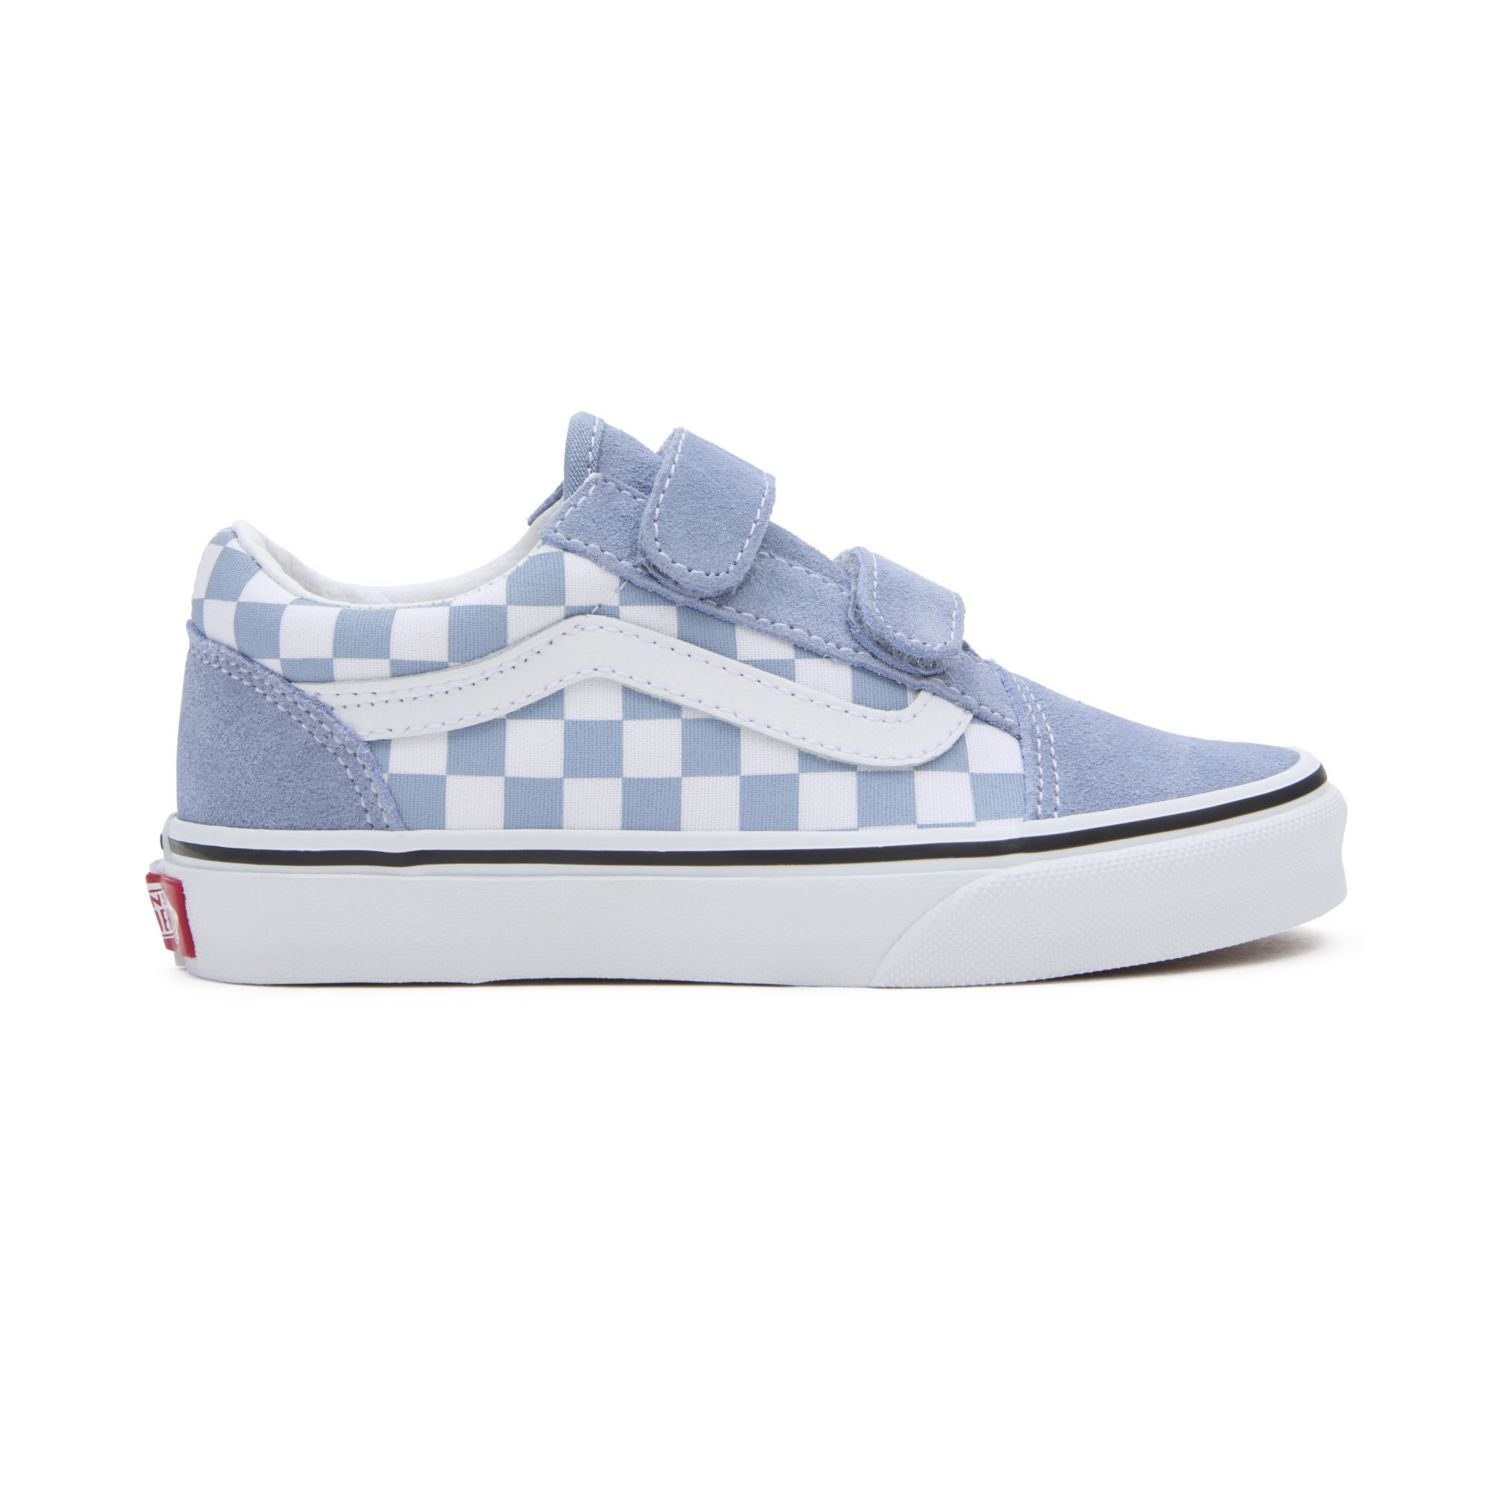 Vans παιδικά sneakers αγόρι/κορίτσι Γαλάζιο VN0A38HDDSB1 Color Theory Checkerboard